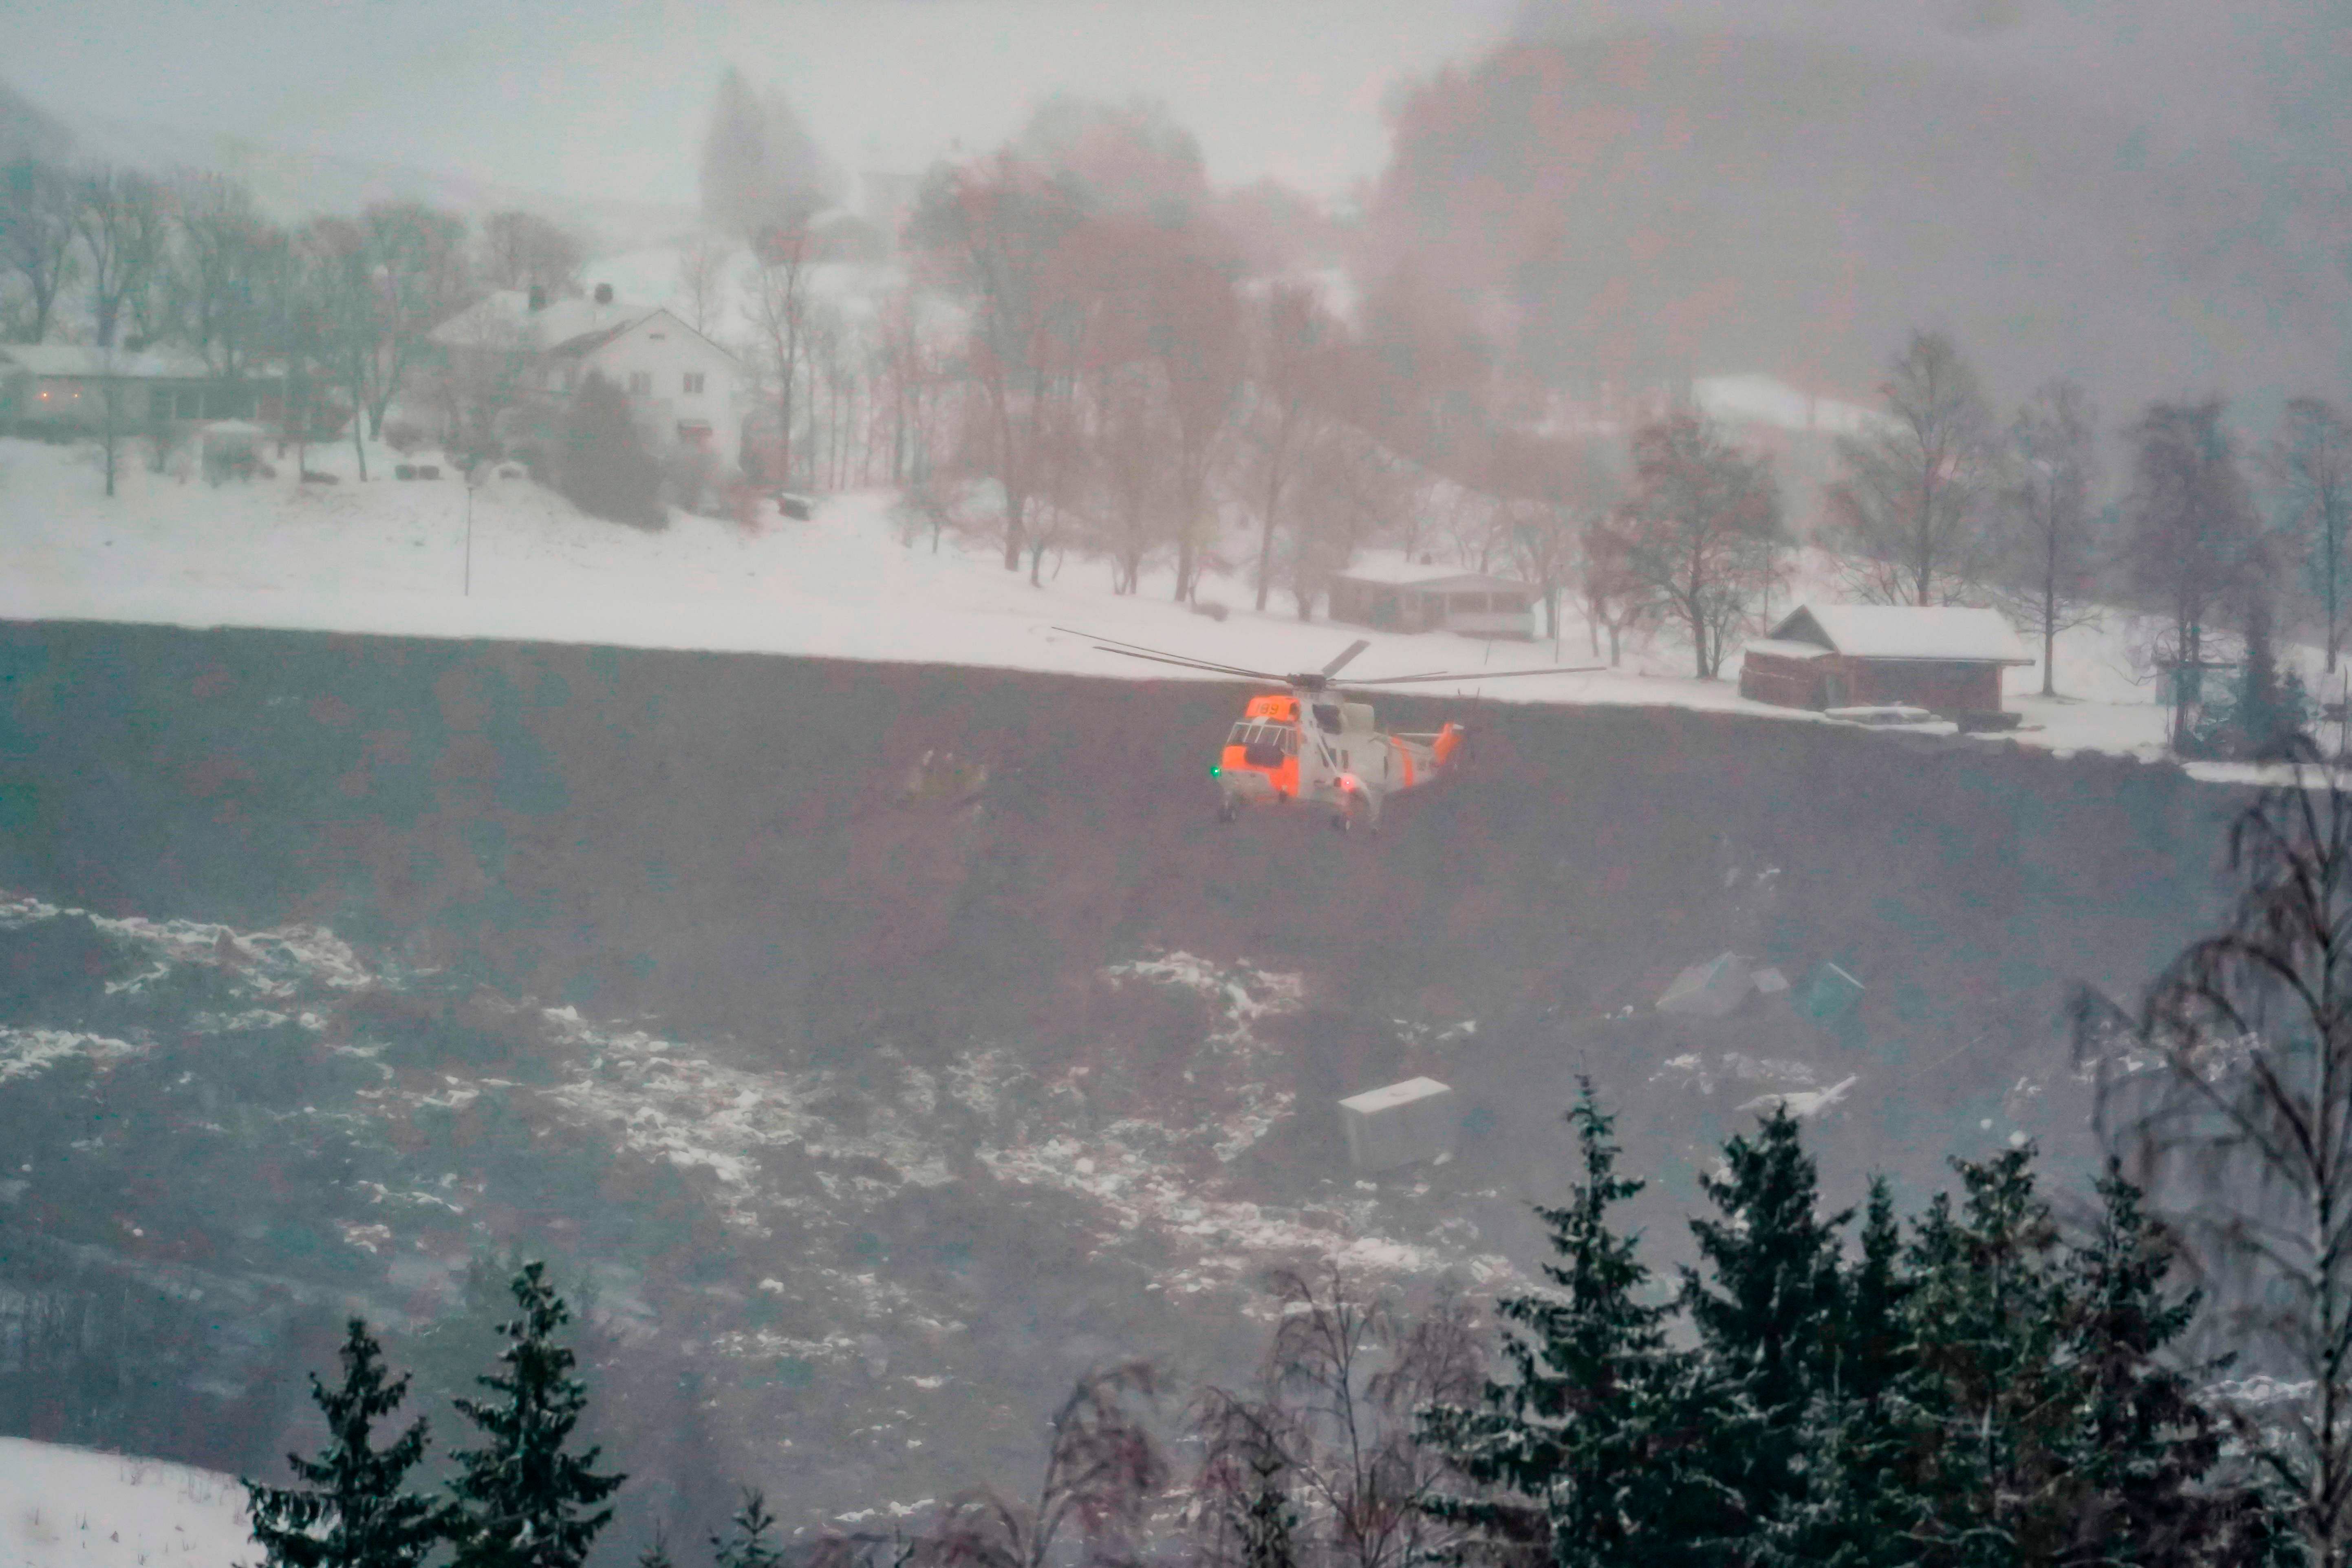 A rescue helicopter flies above debris from destroyed houses seen in a ravine created by a landslide in the town of Ask, Gjerdrum county, some 40 km northeast of the Norwegian capital Oslo. - Several houses were taken by a landslide in the early hours of December 30, several injured were taken to hospital for treatment and yet more people are listed as missing as the rescue mission continues. Credit: AFP Photo